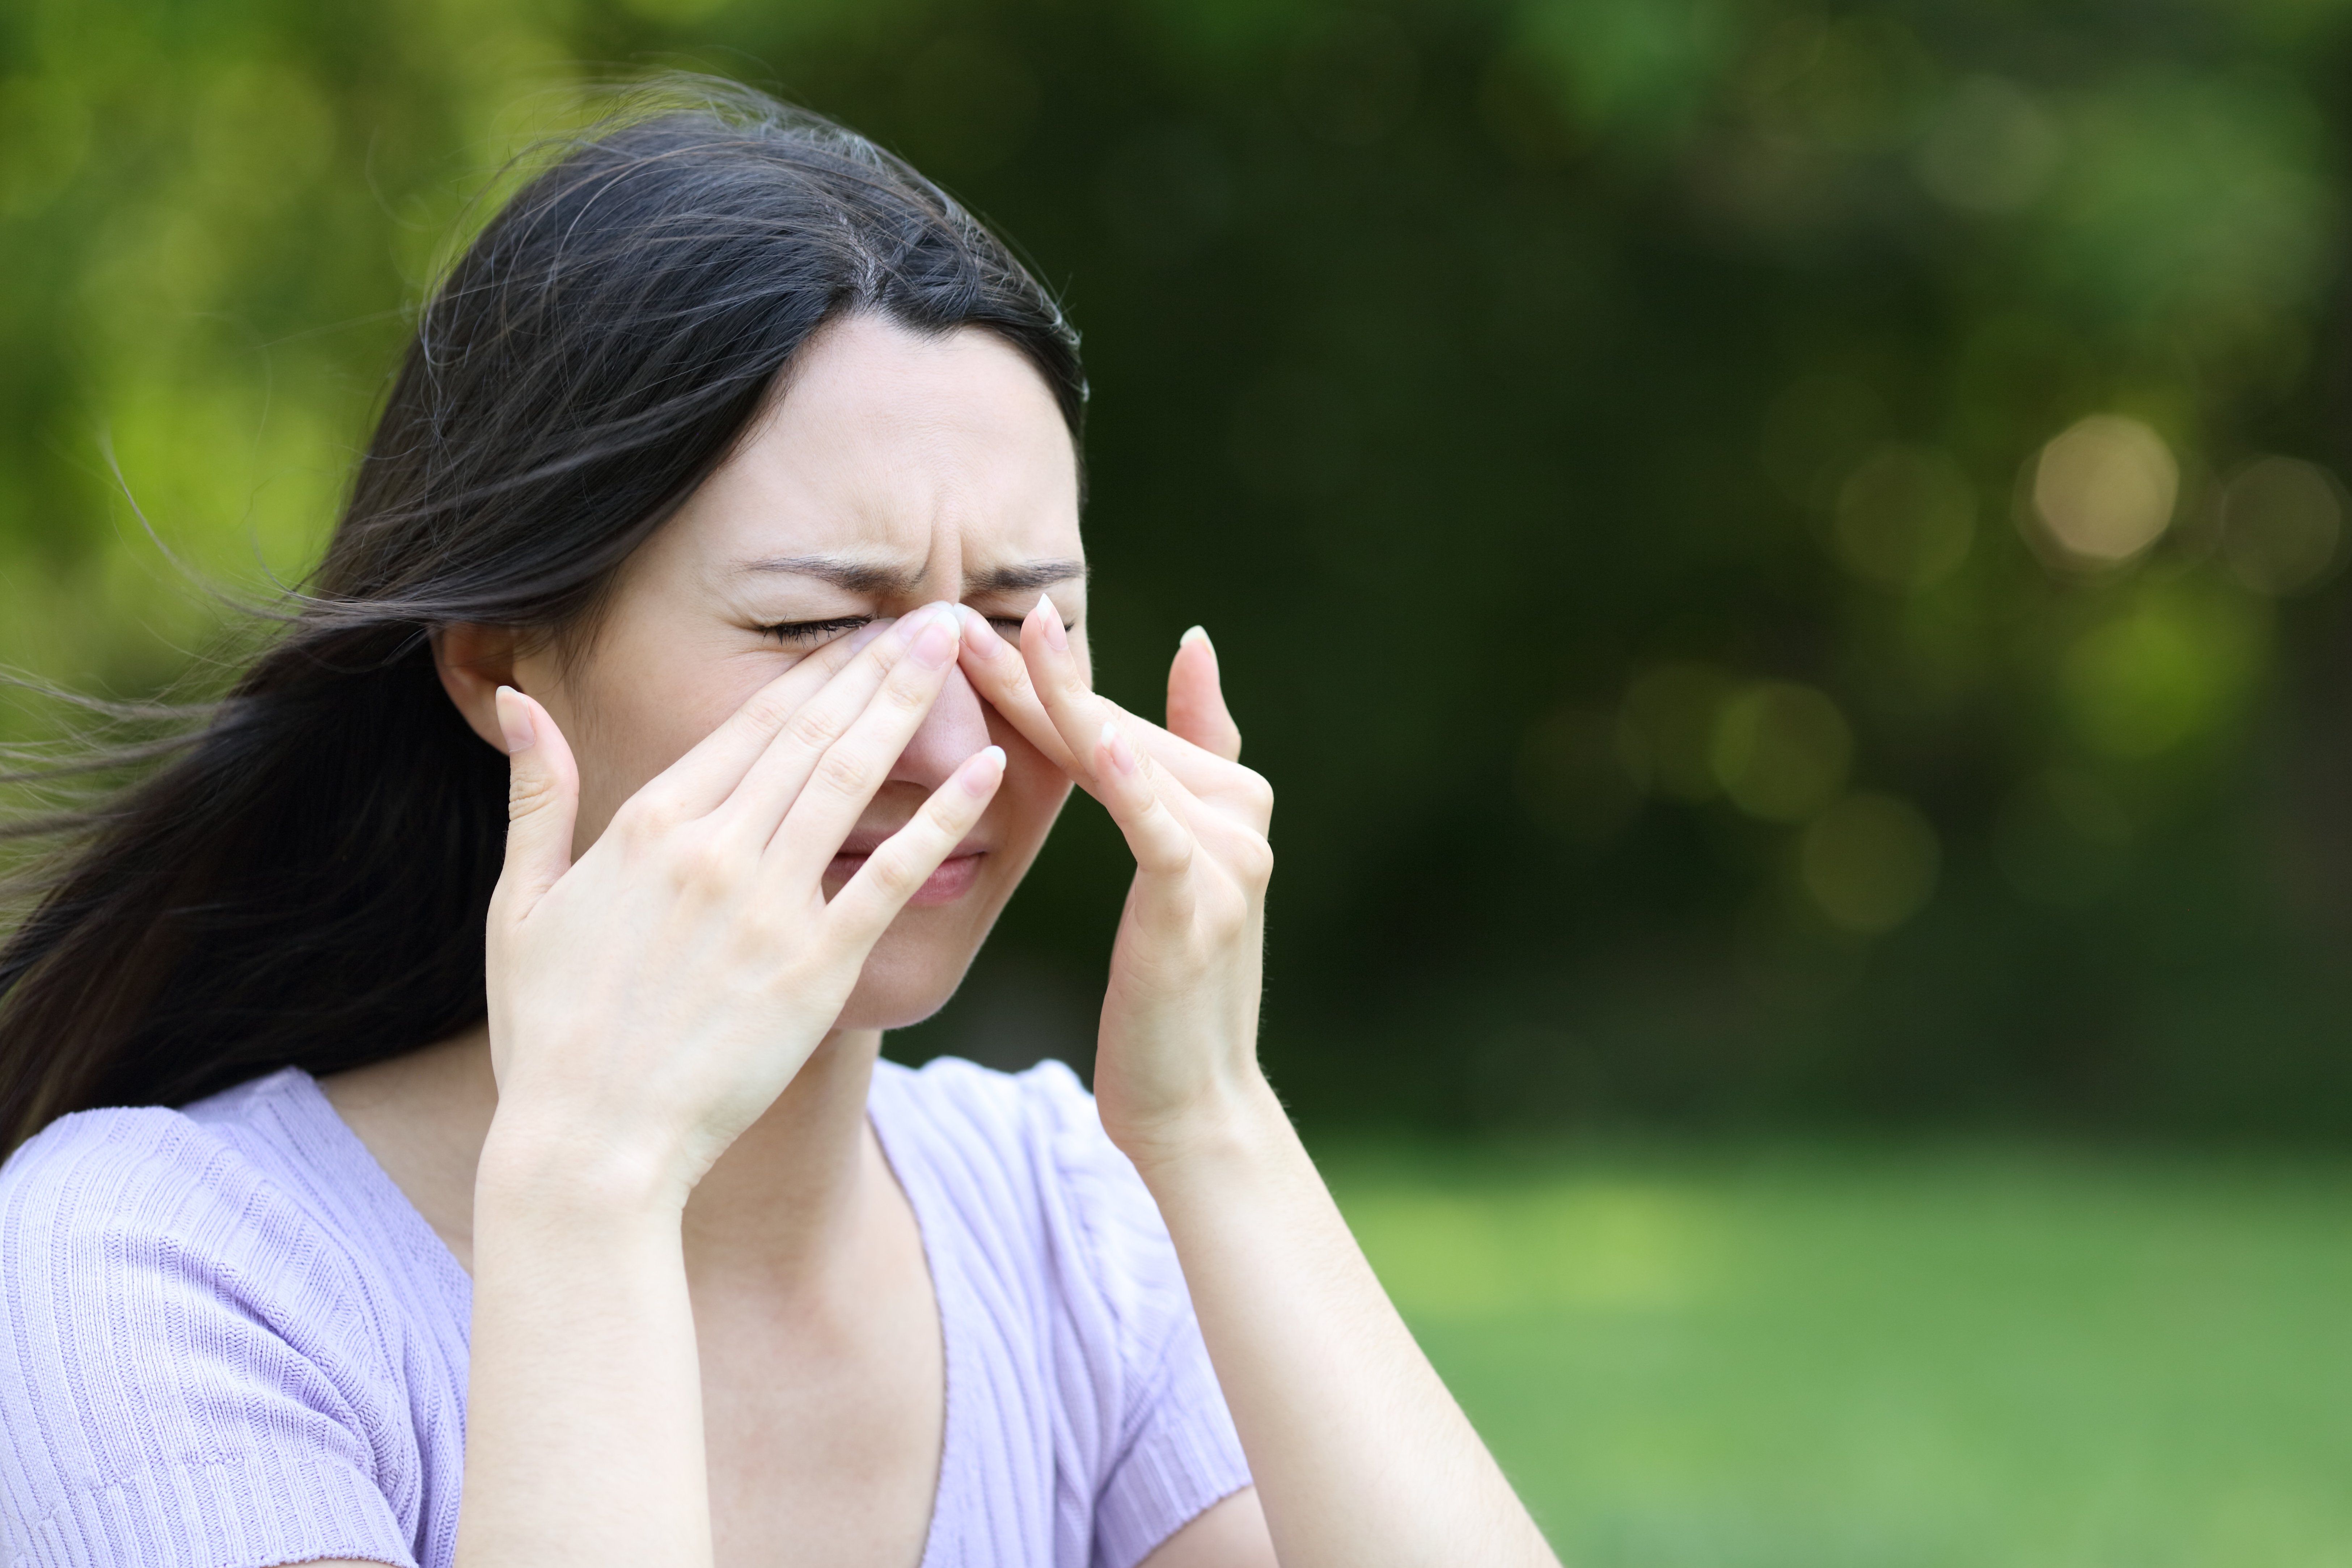 Frequently Asked Questions About Seasonal Allergies